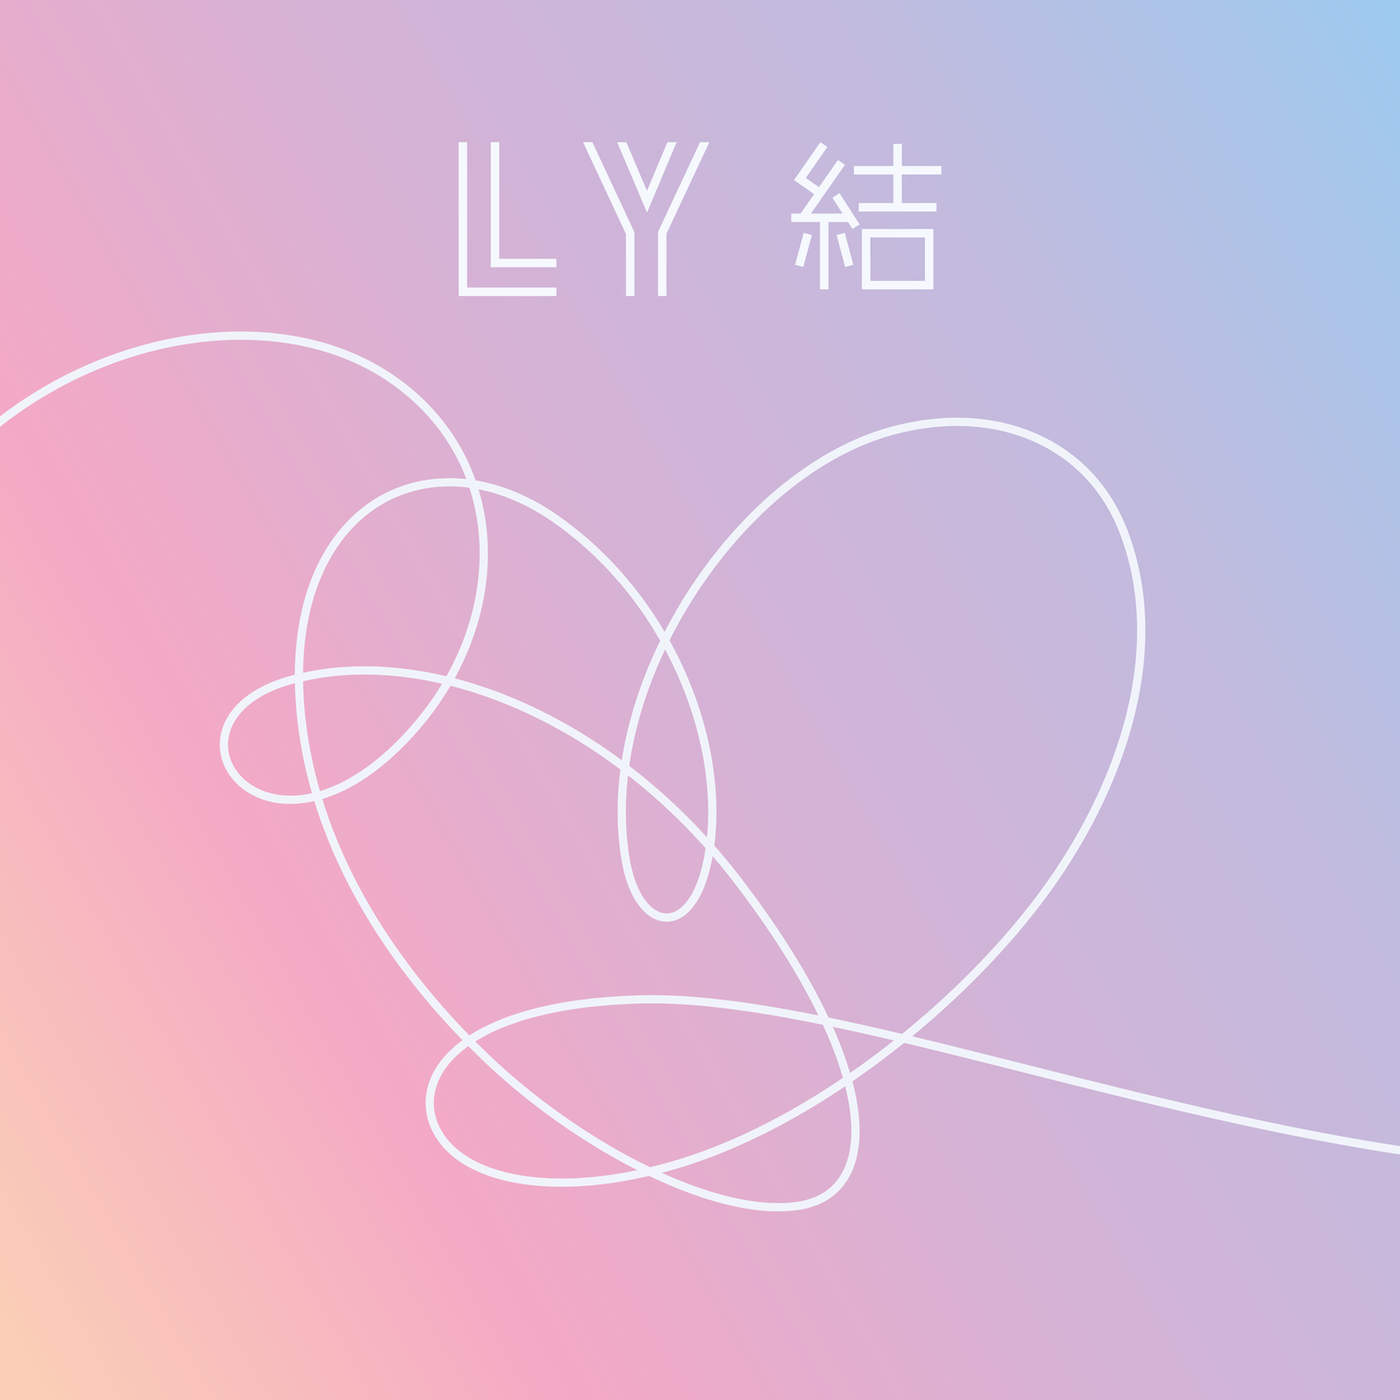 Review: BTS’ New Album “Love Yourself: Answer” – The Vision